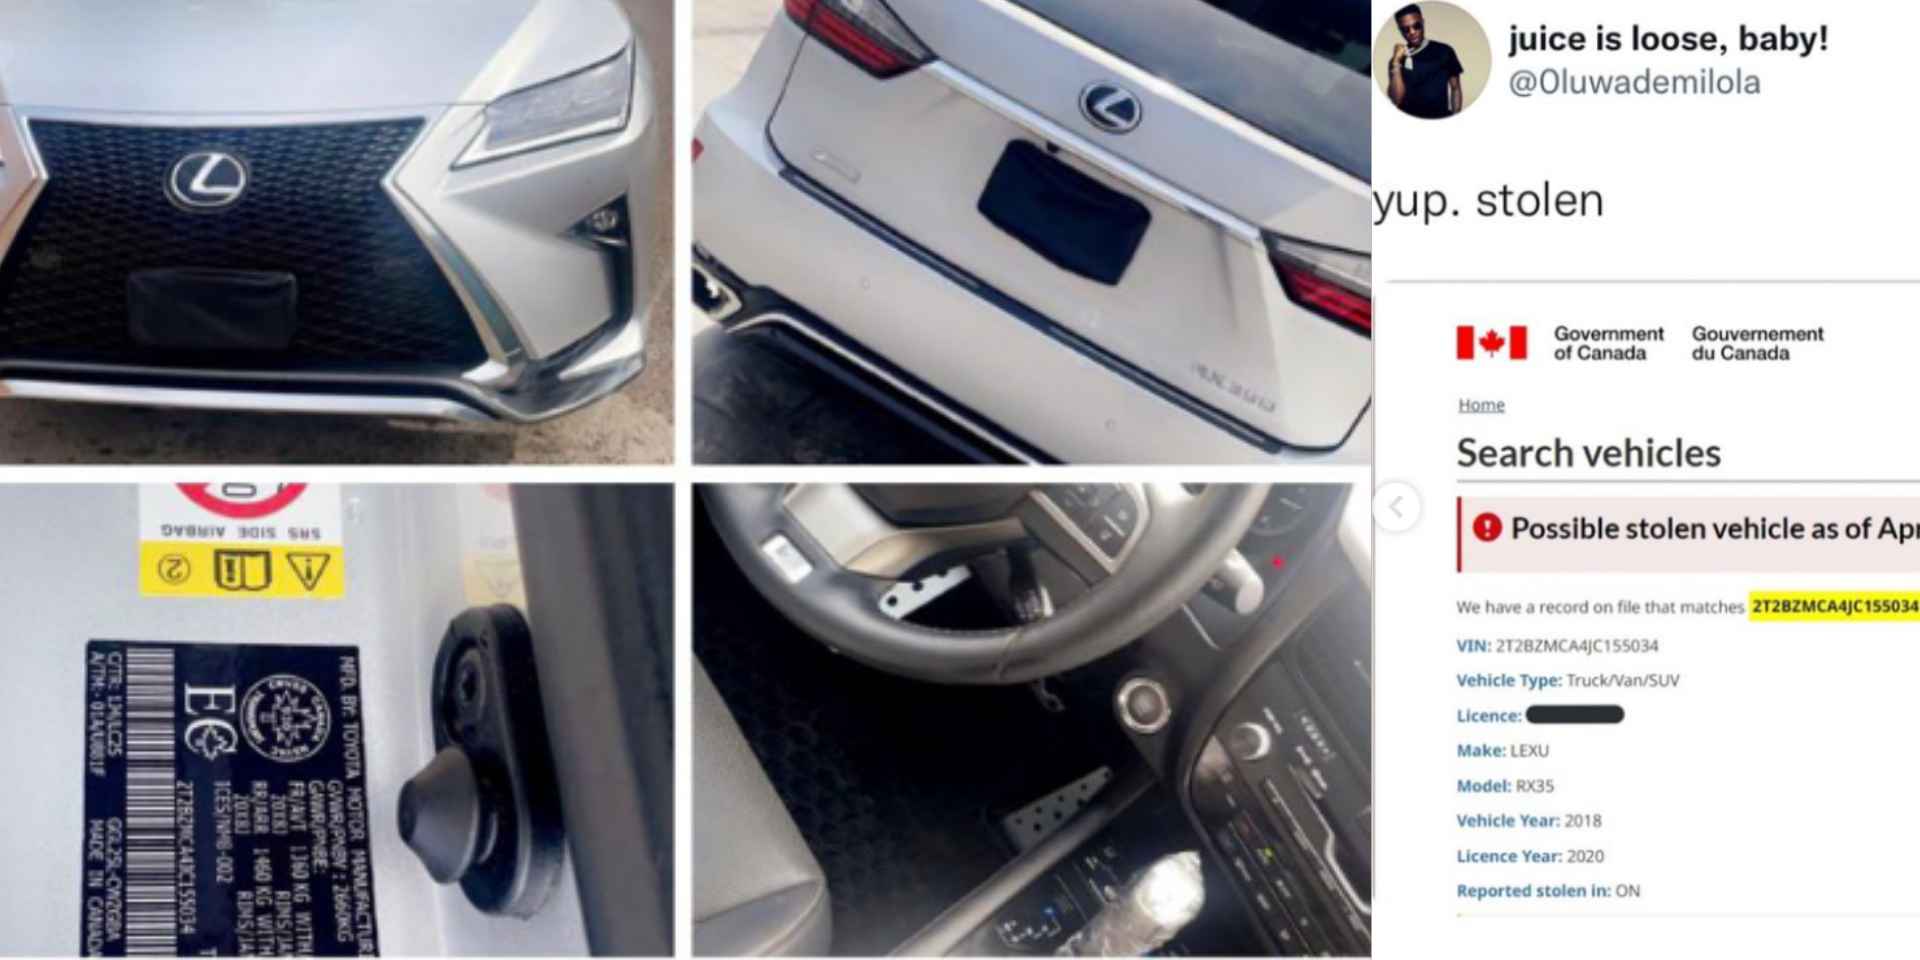 Man quickly deletes car advert on Twitter after a tweep shared proof of it being stolen [Screenshots]